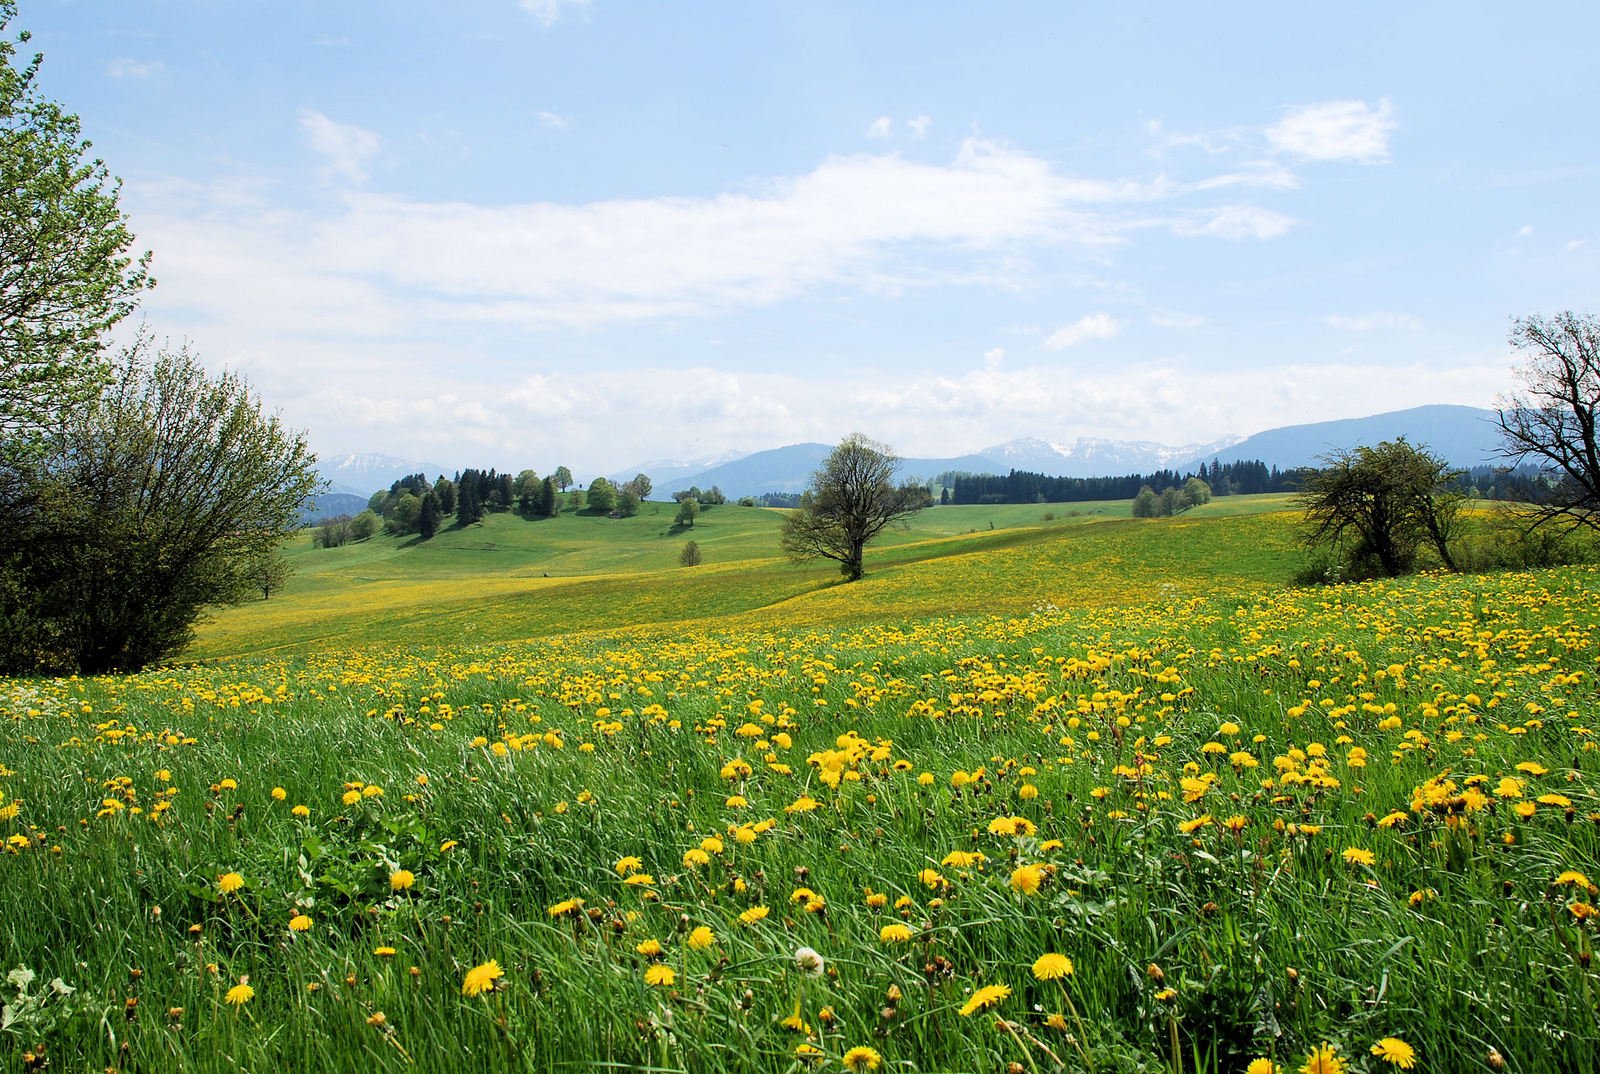 a large grassy field with yellow flowers in the foreground and hills and trees